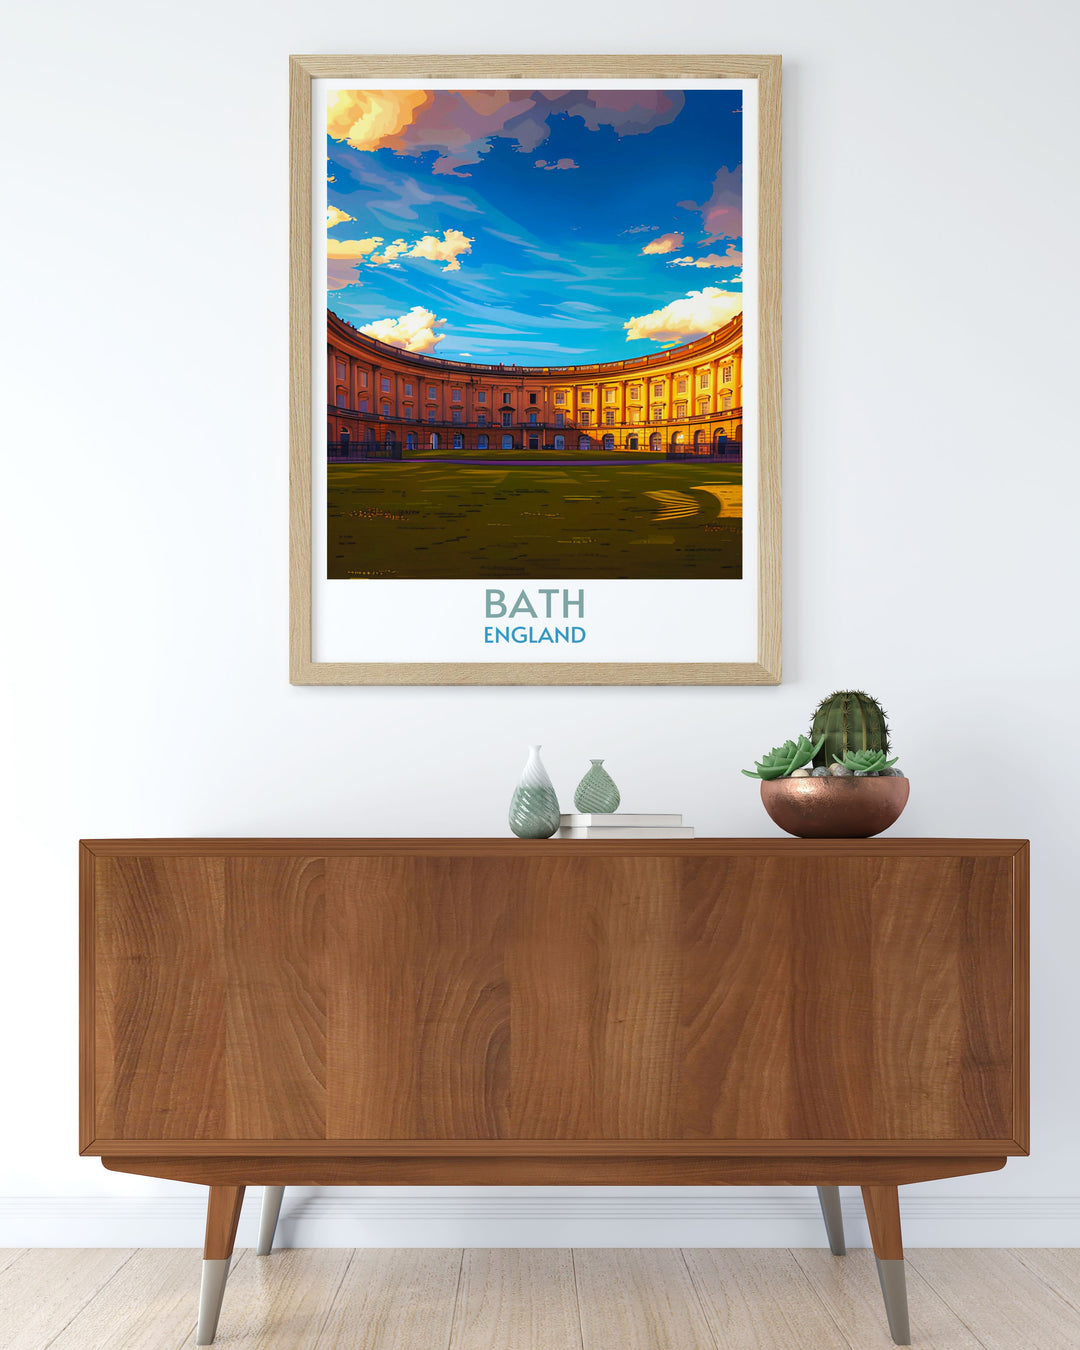 Engaging wall decor of Royal Crescent in Bath, England, emphasizing the landmarks historical significance and aesthetic appeal.